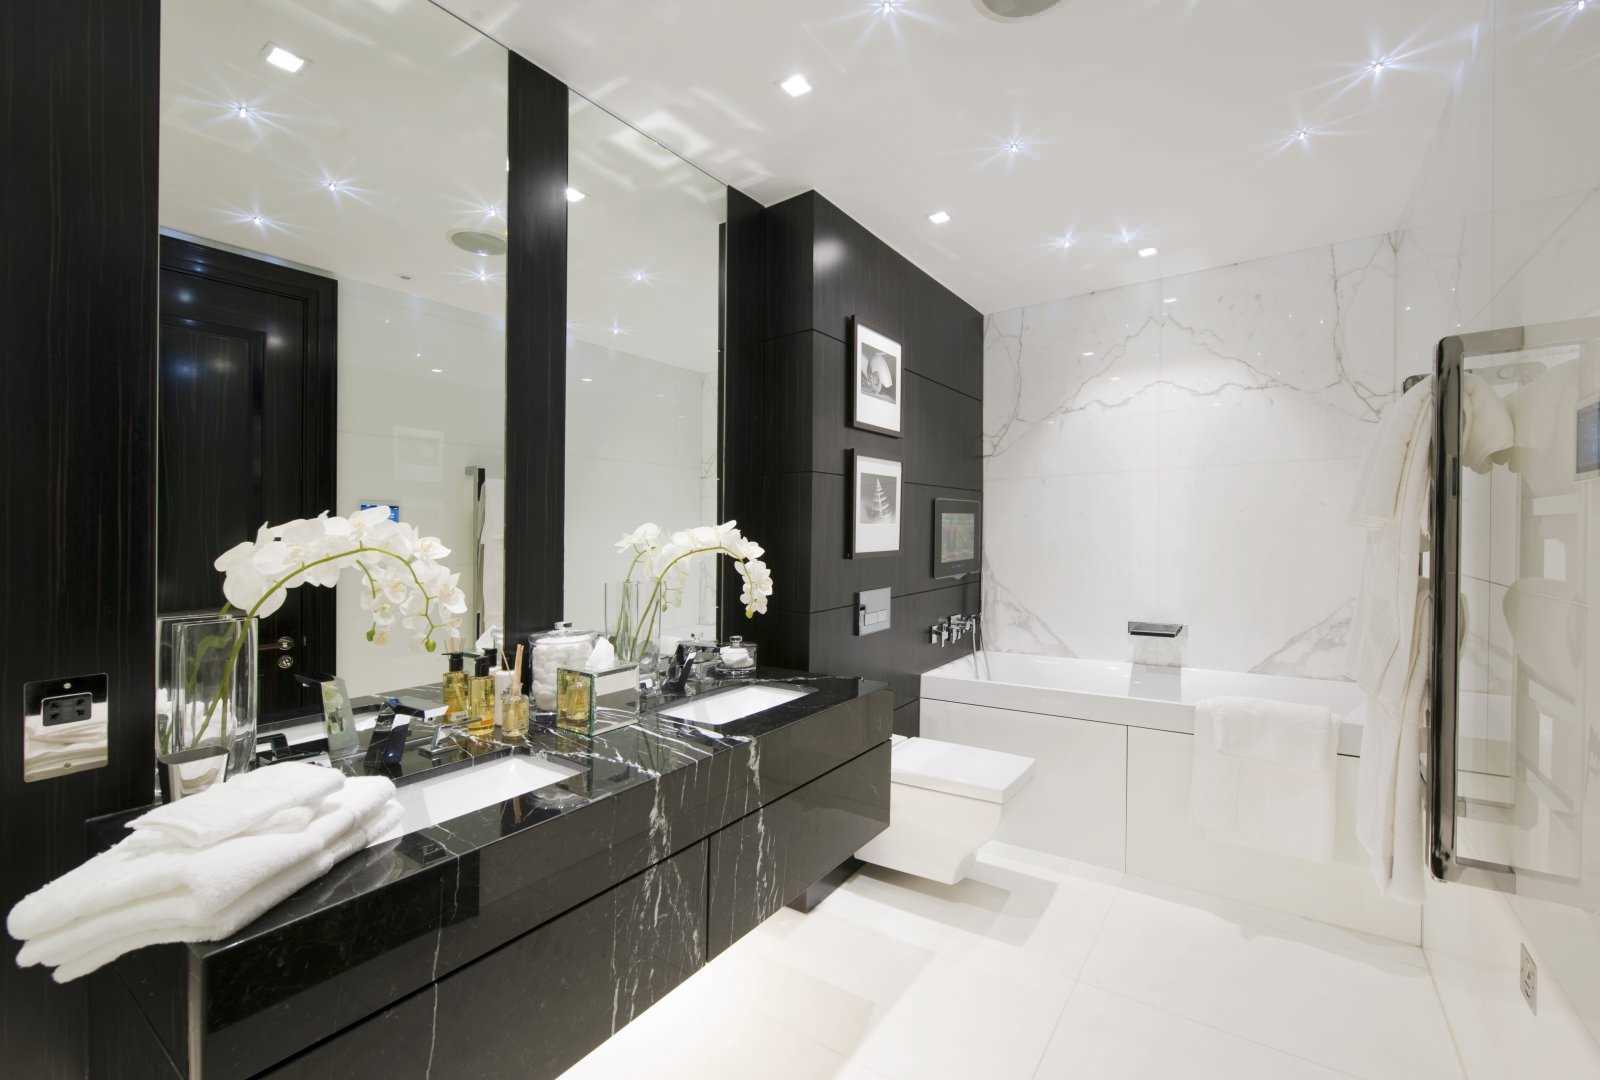 version of a beautiful bathroom design in black and white